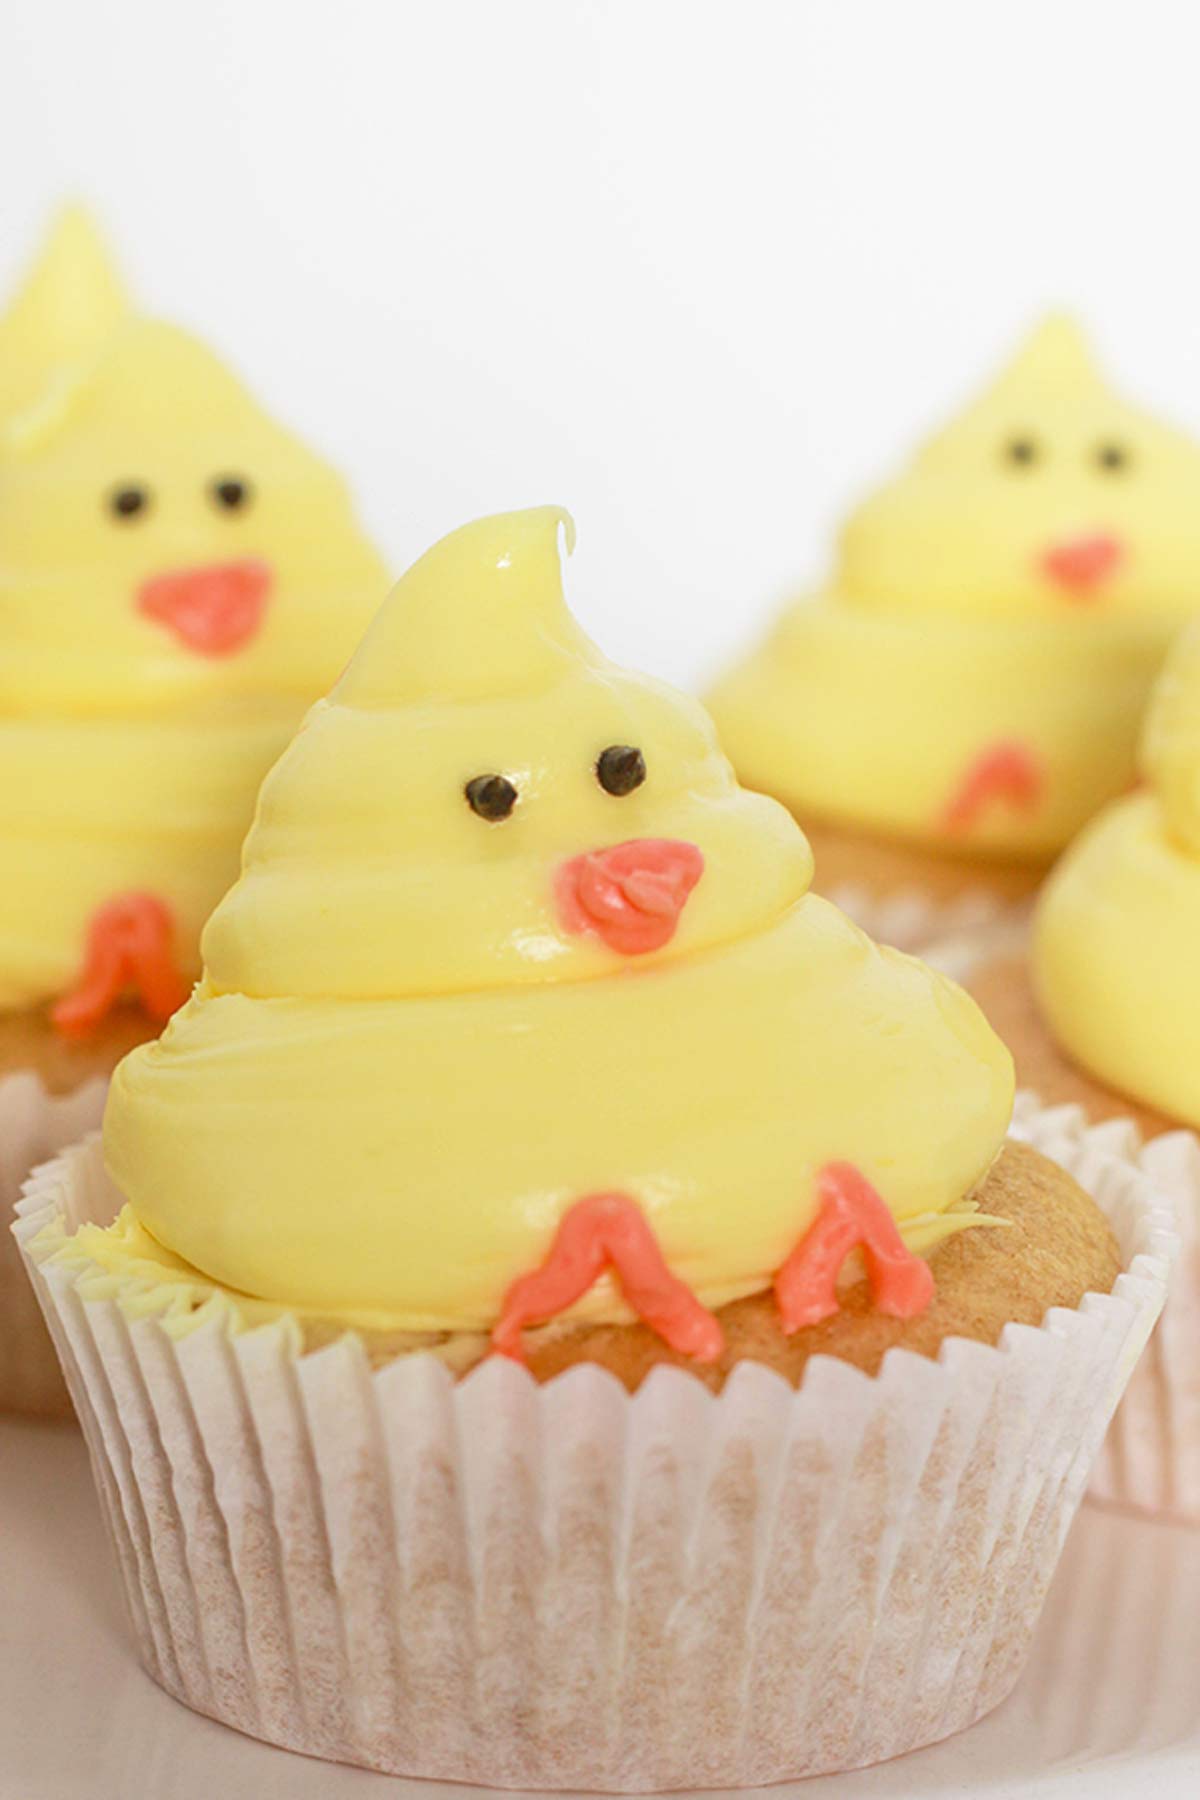 Easter Chick Cupcakes On Cake Stand2